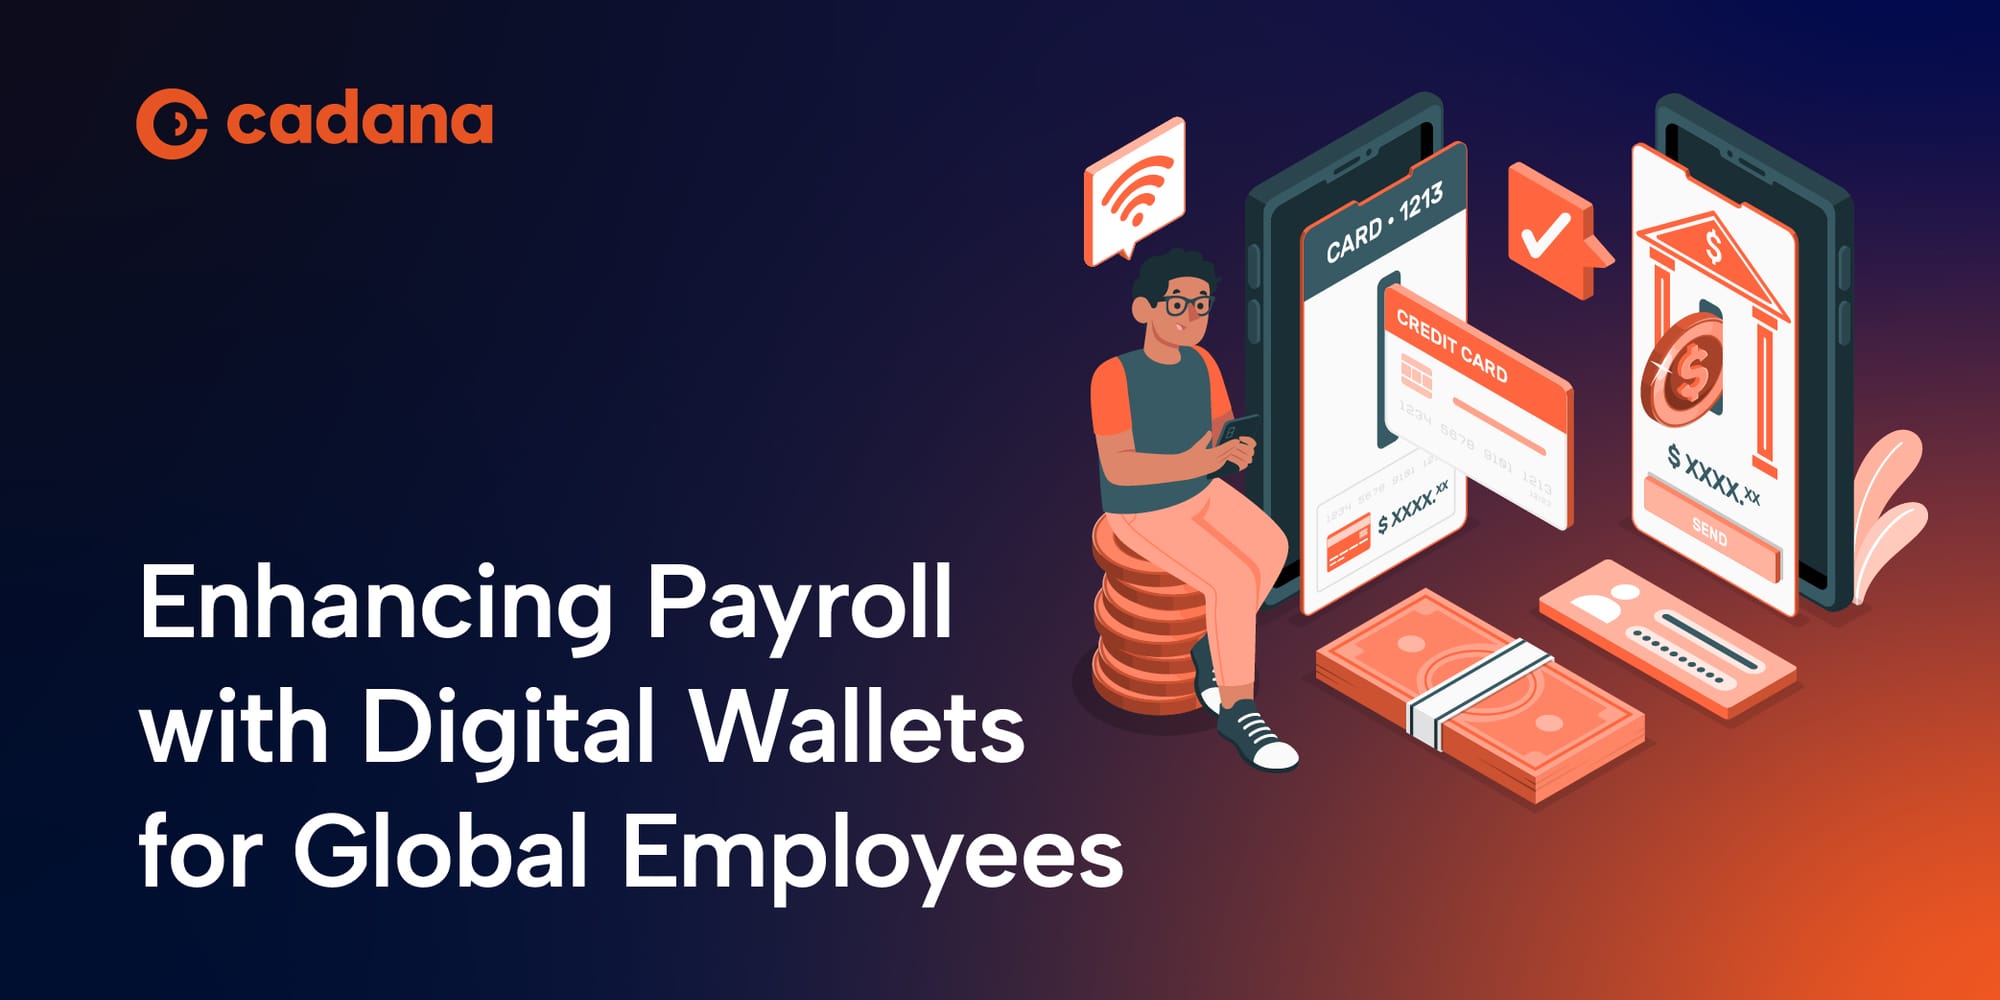 Enhancing Payroll with Digital Wallets for Global Employees